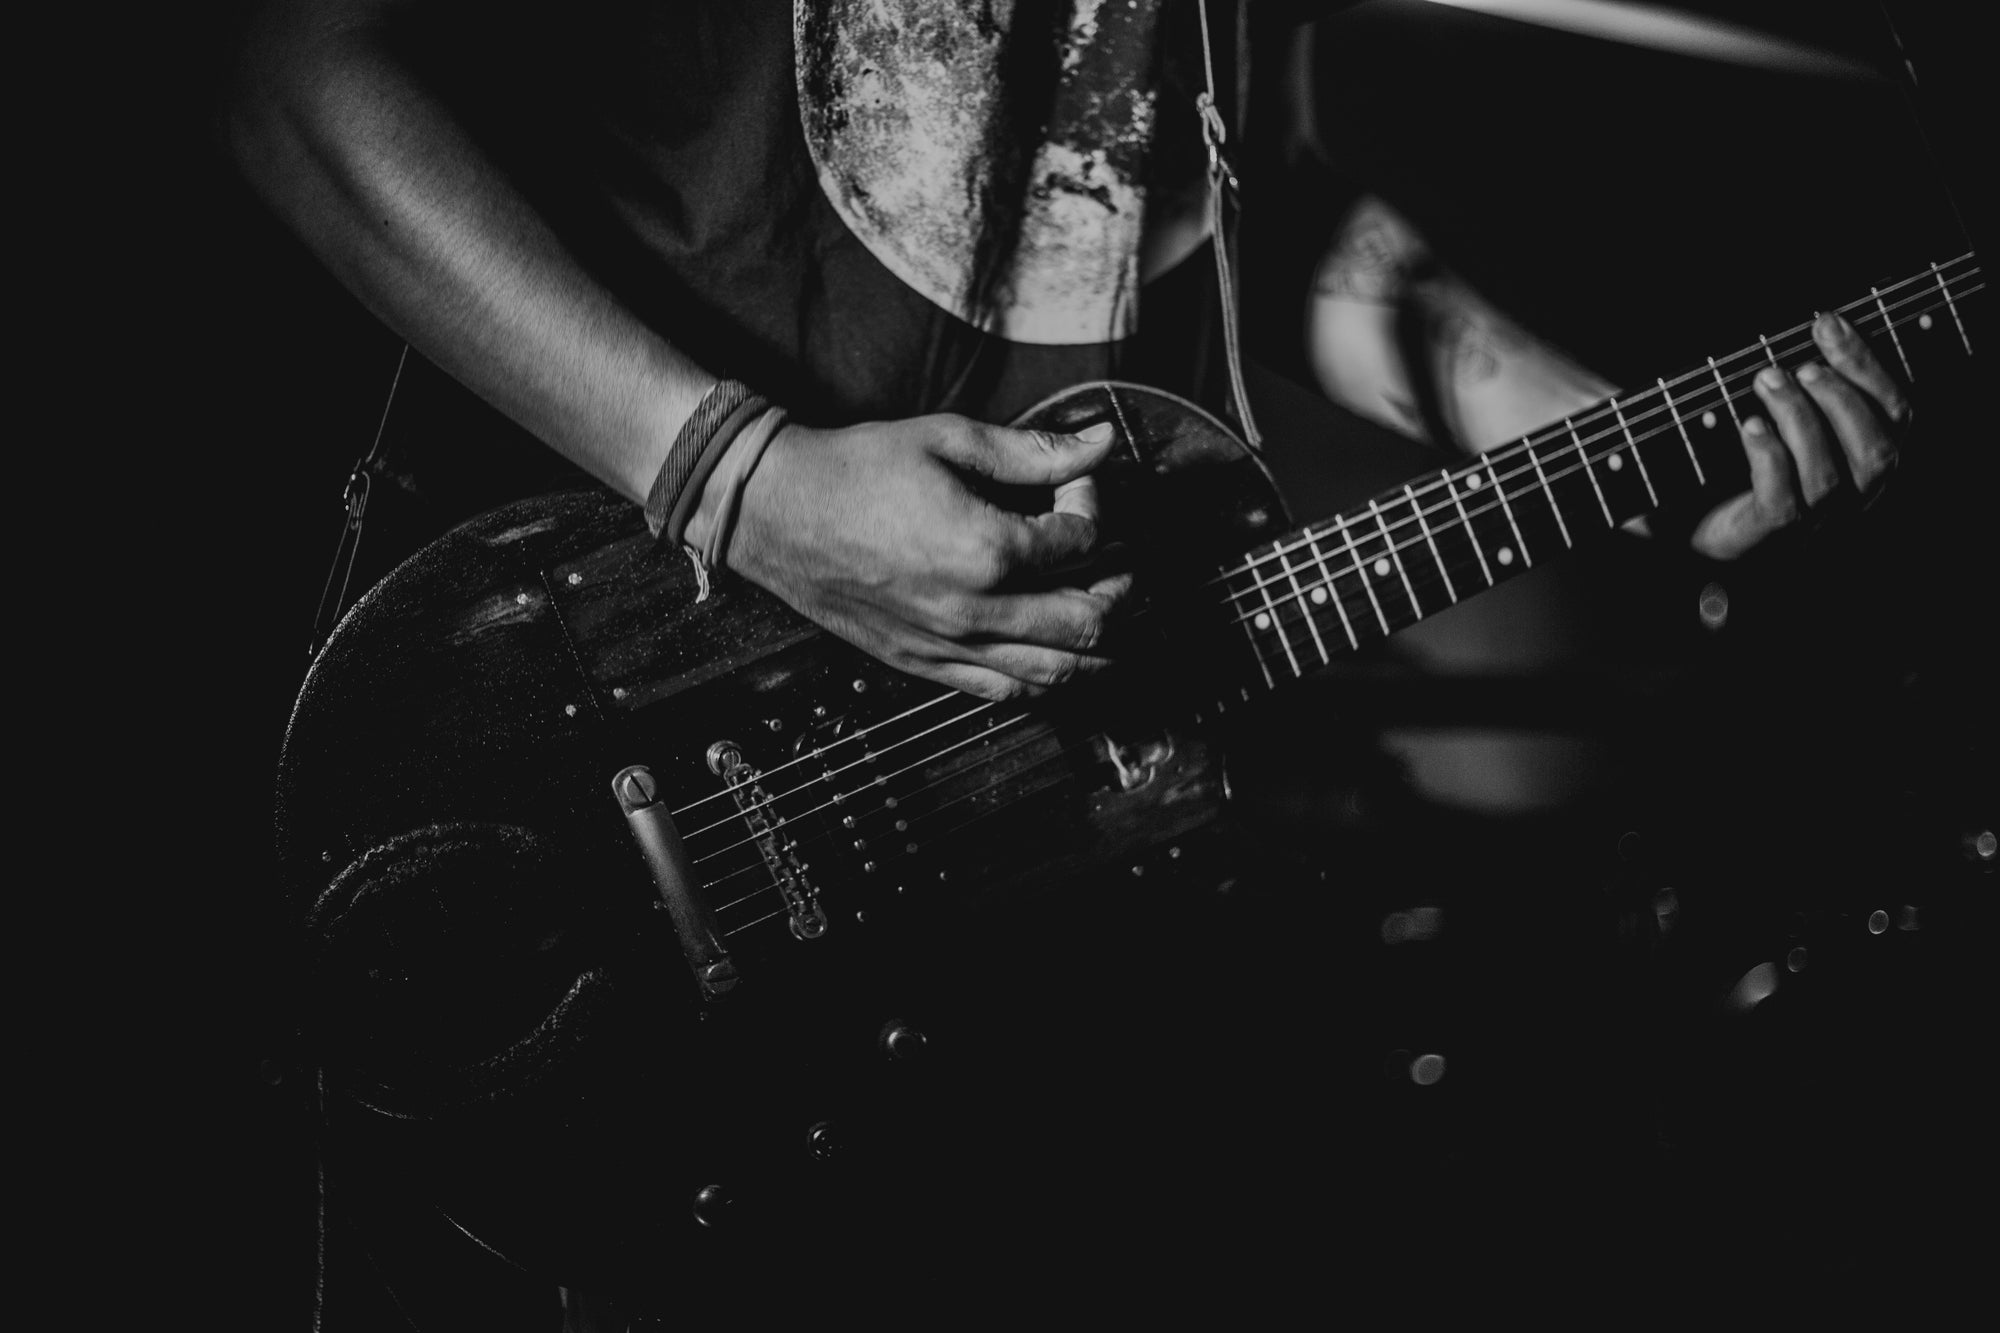 Black and white photo of a guitar player.